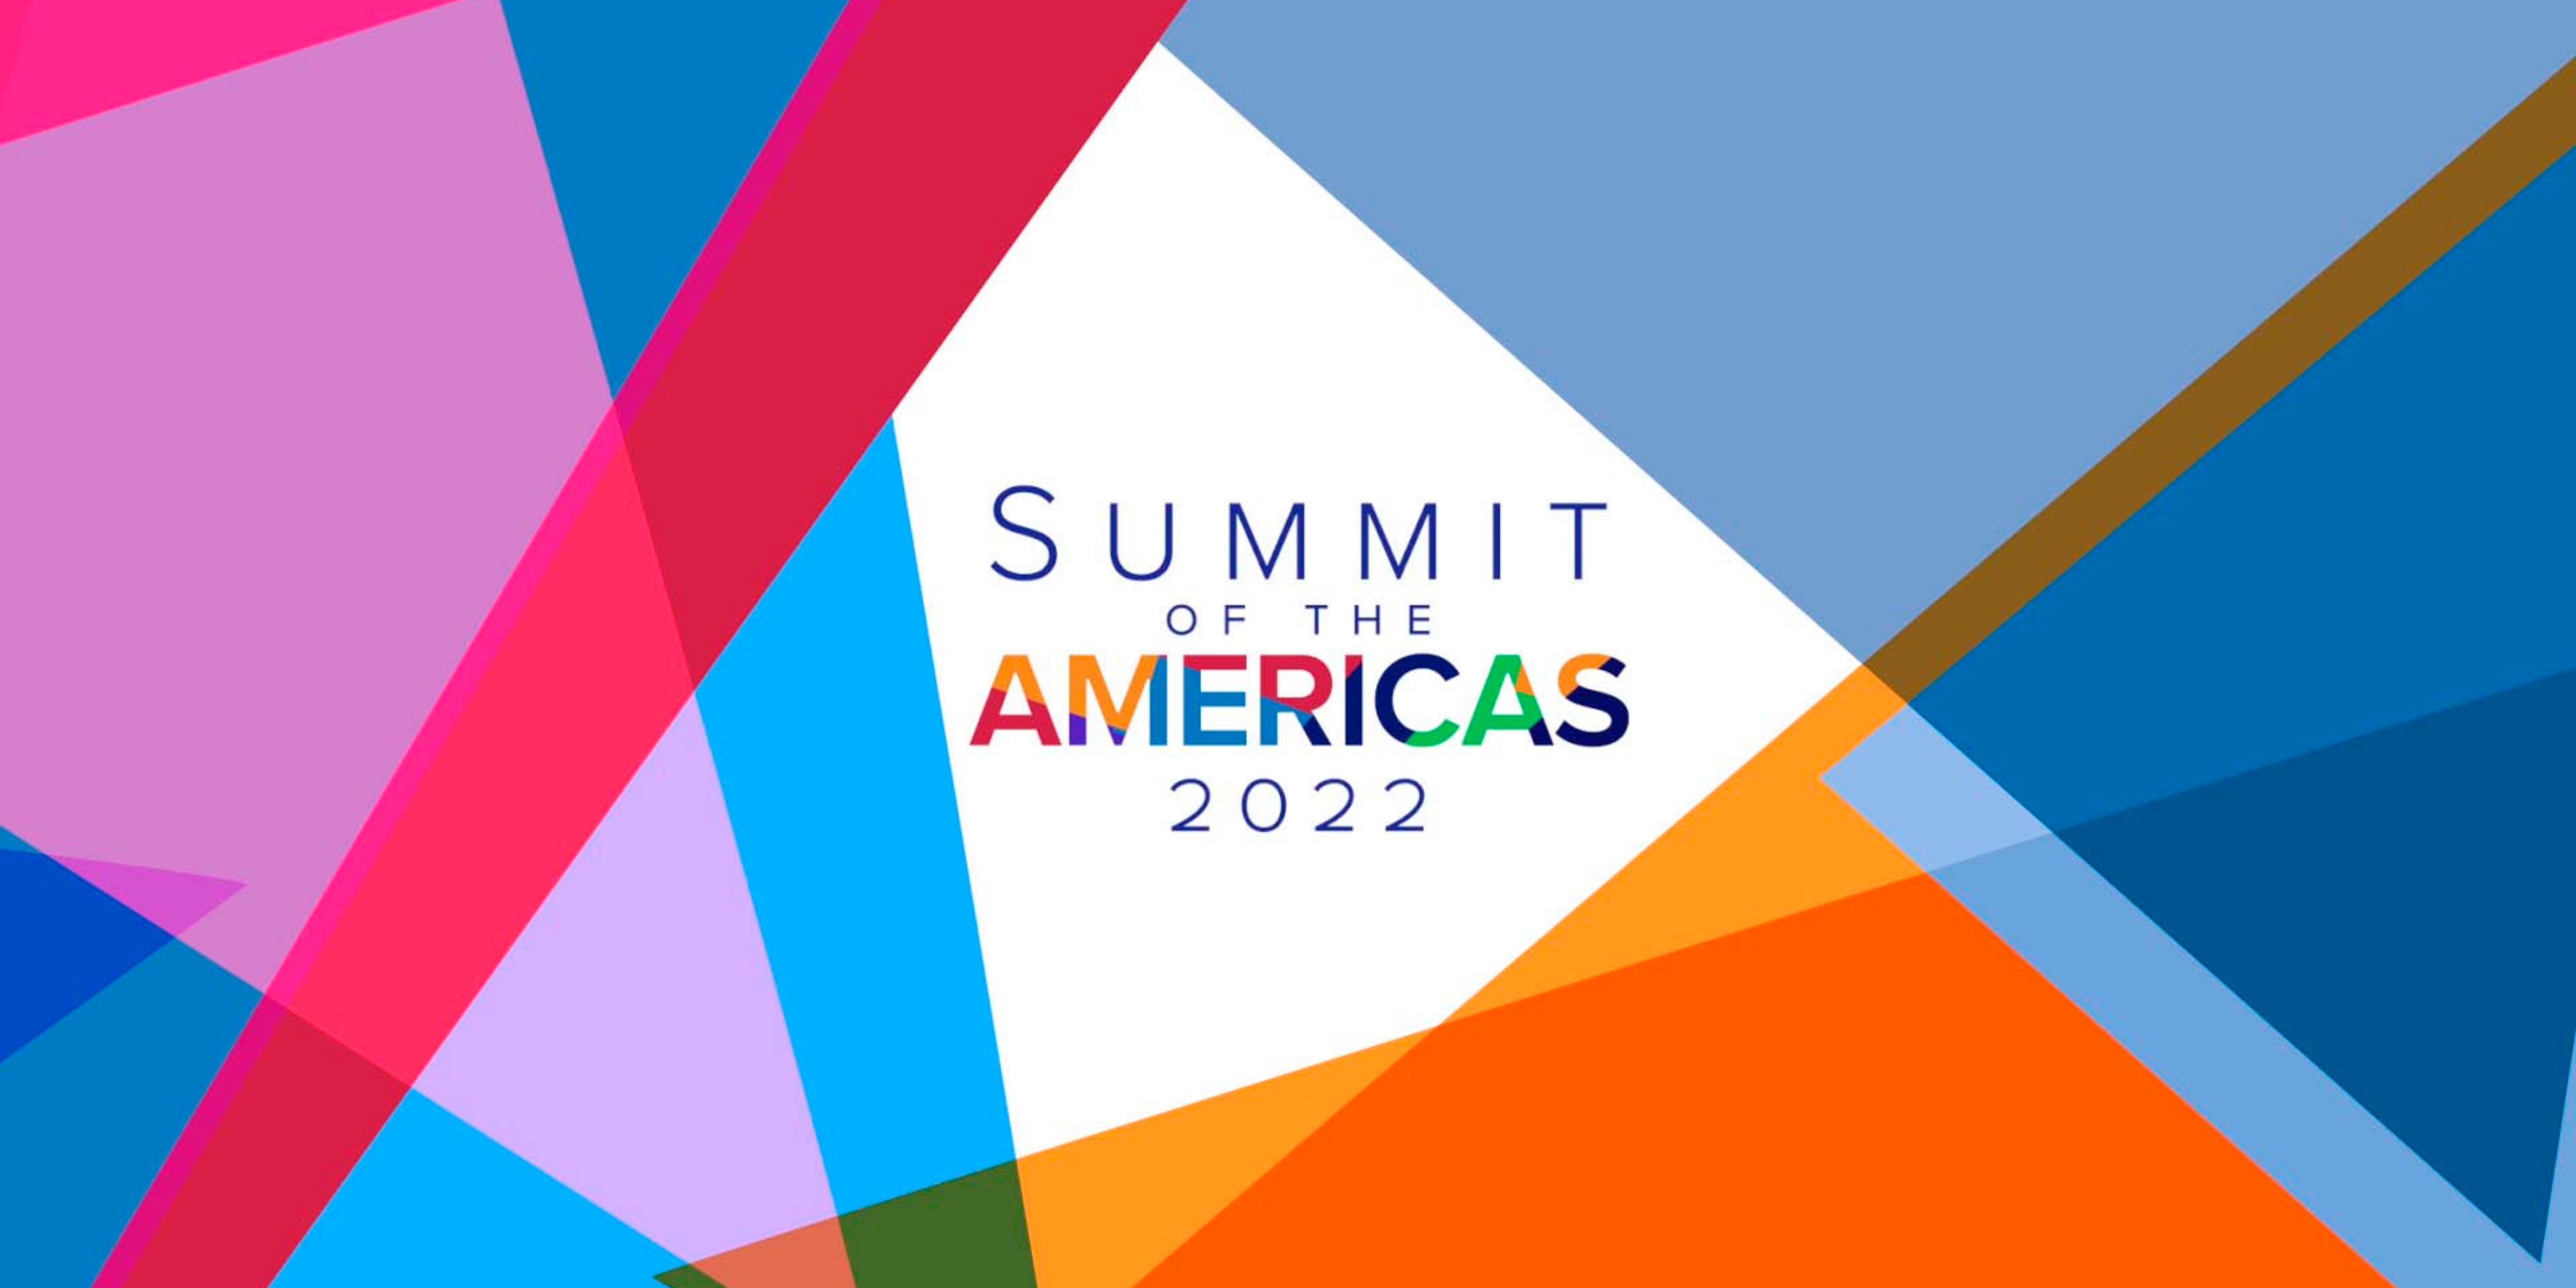 Access Alert | The Summit of the Americas 2022: A Tech Policy Brief